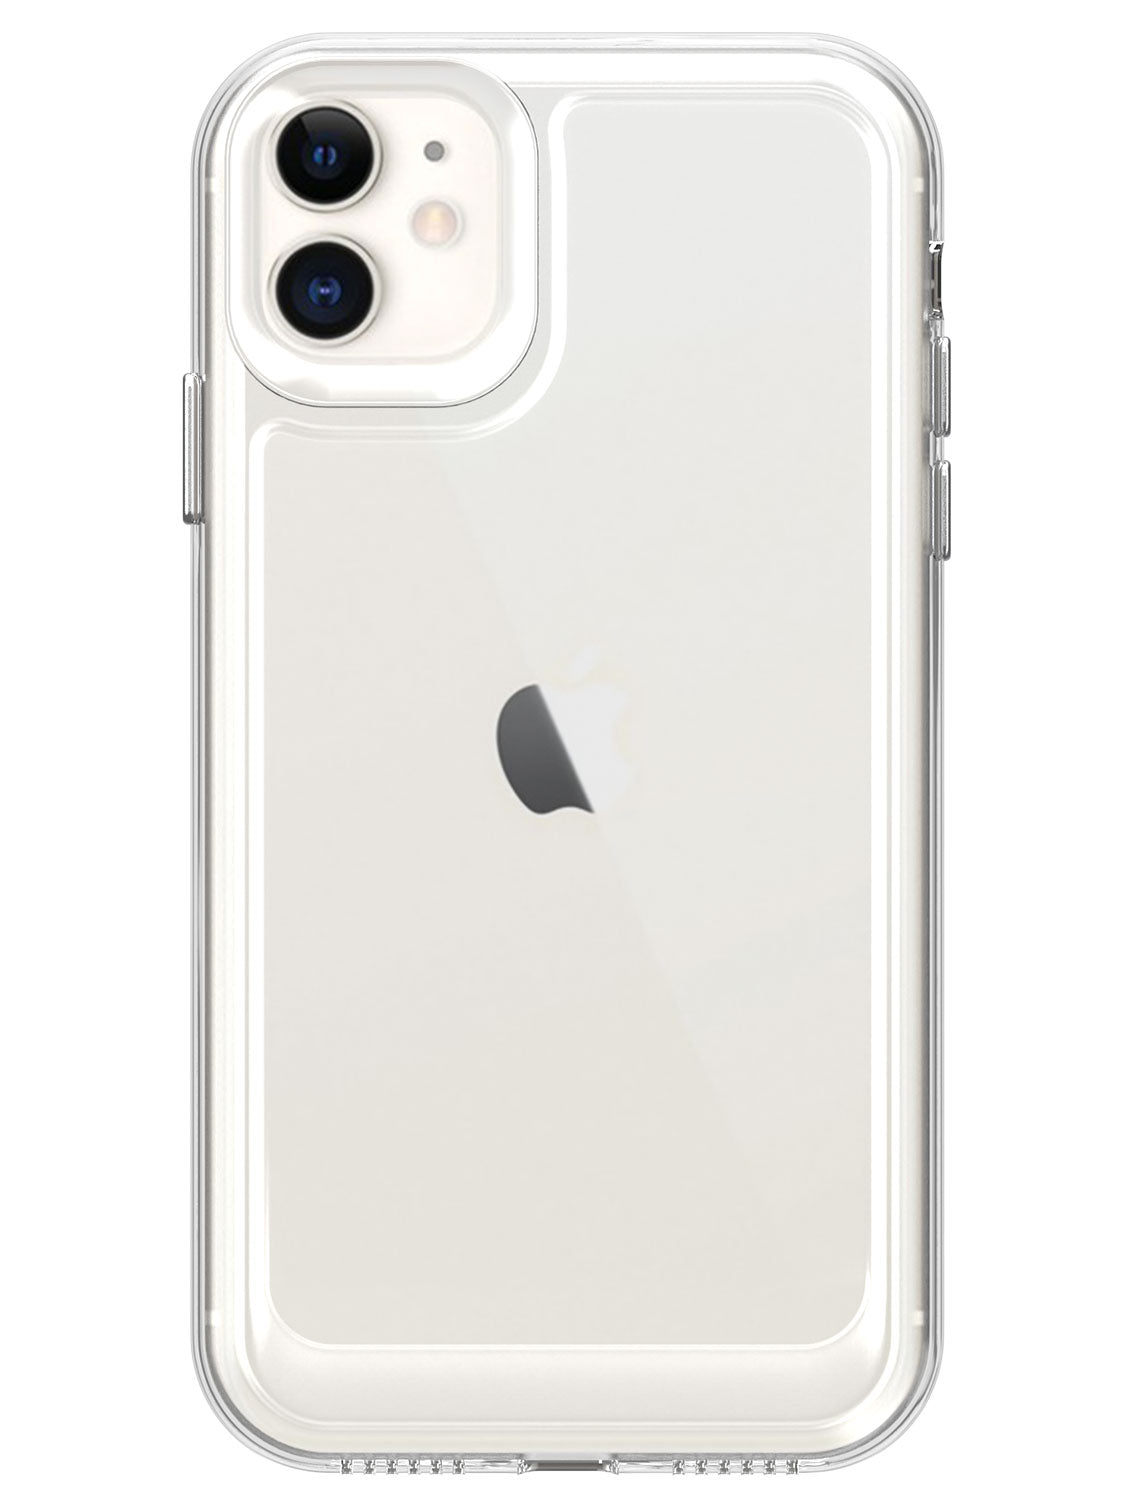 case for iPhone 11 , back cover for iPhone 11 , cases and covers for iPhone 11